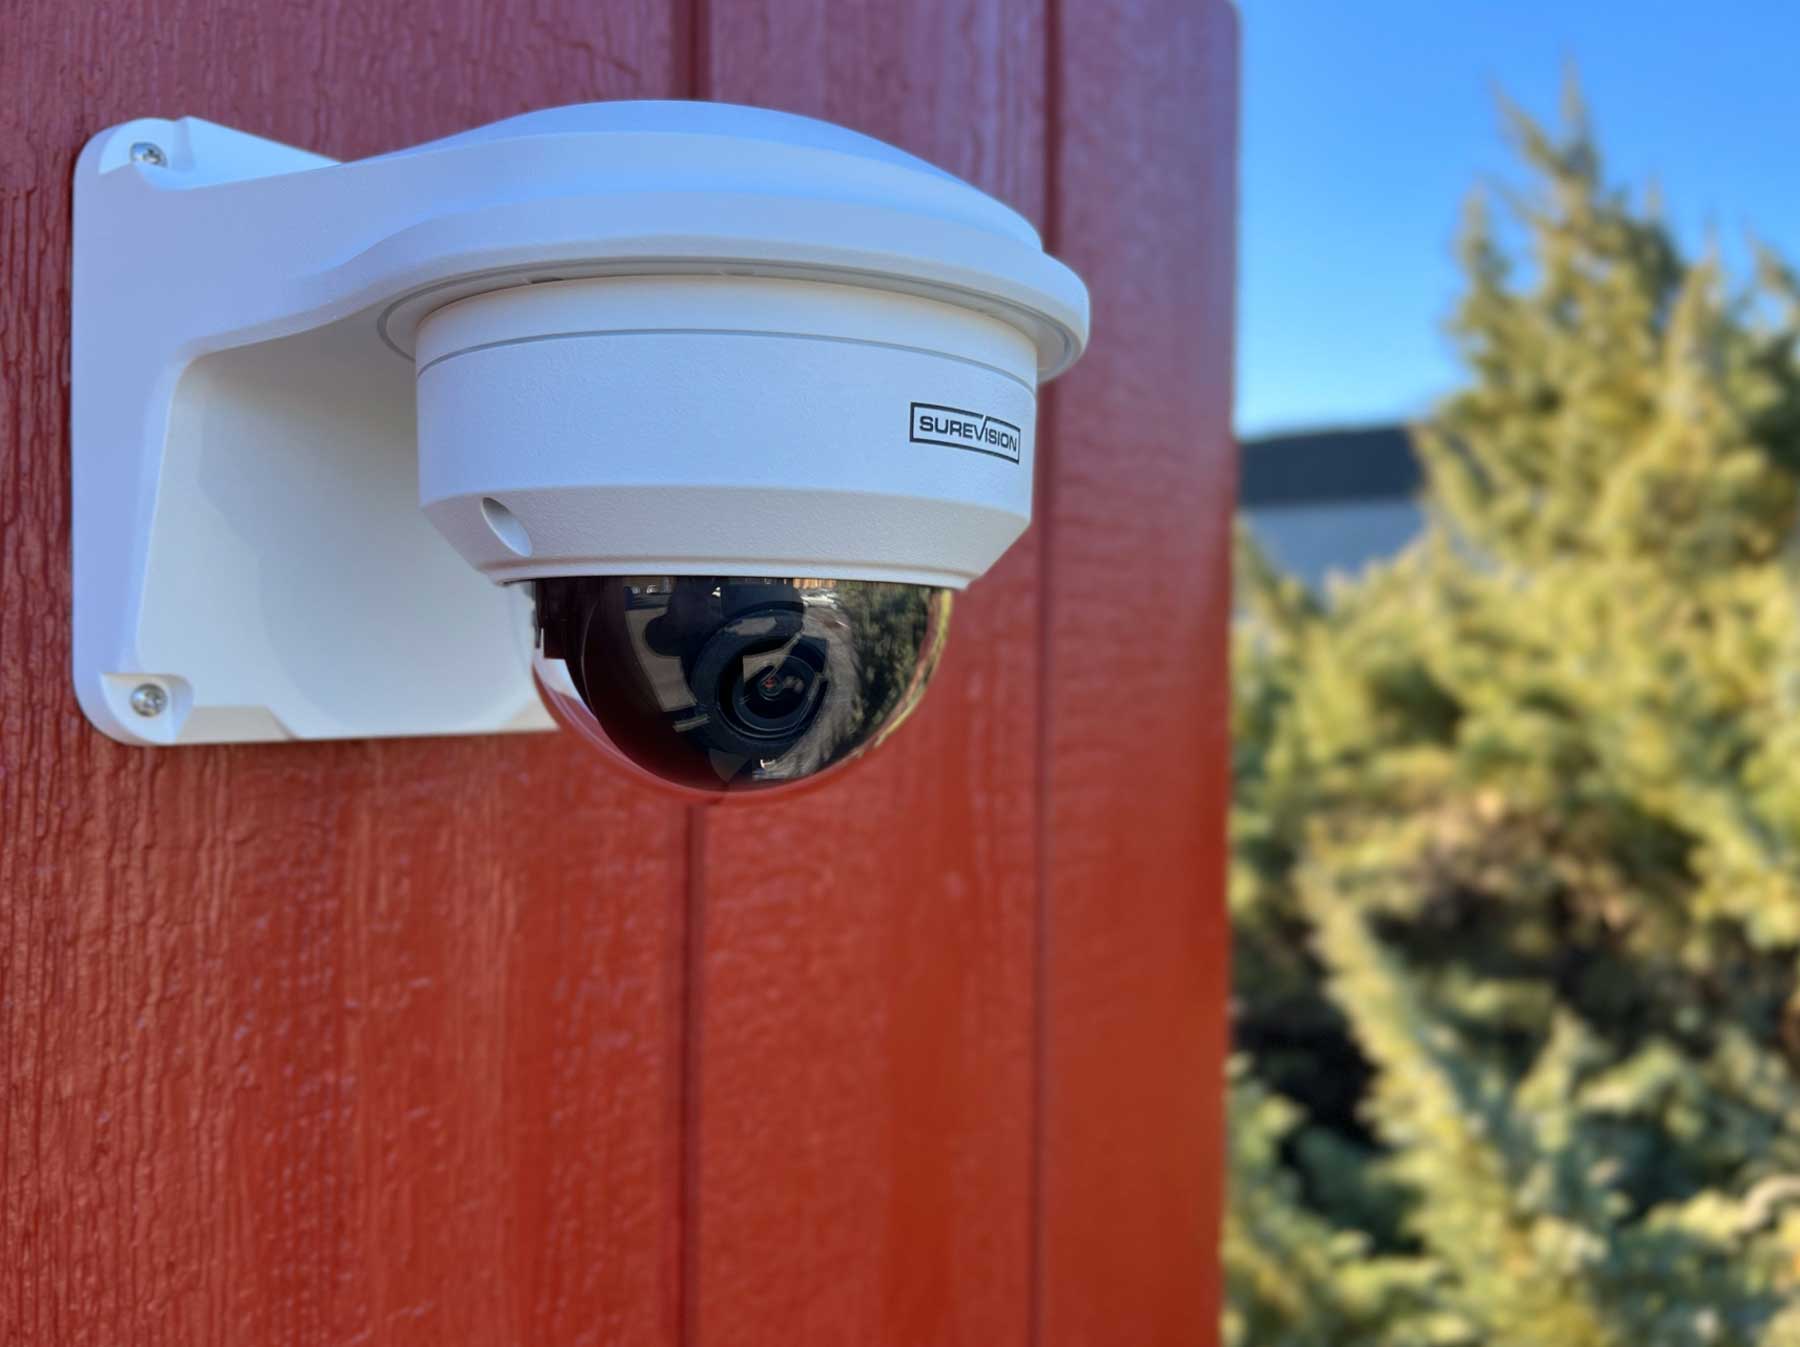 Newest SureVision Security Camera